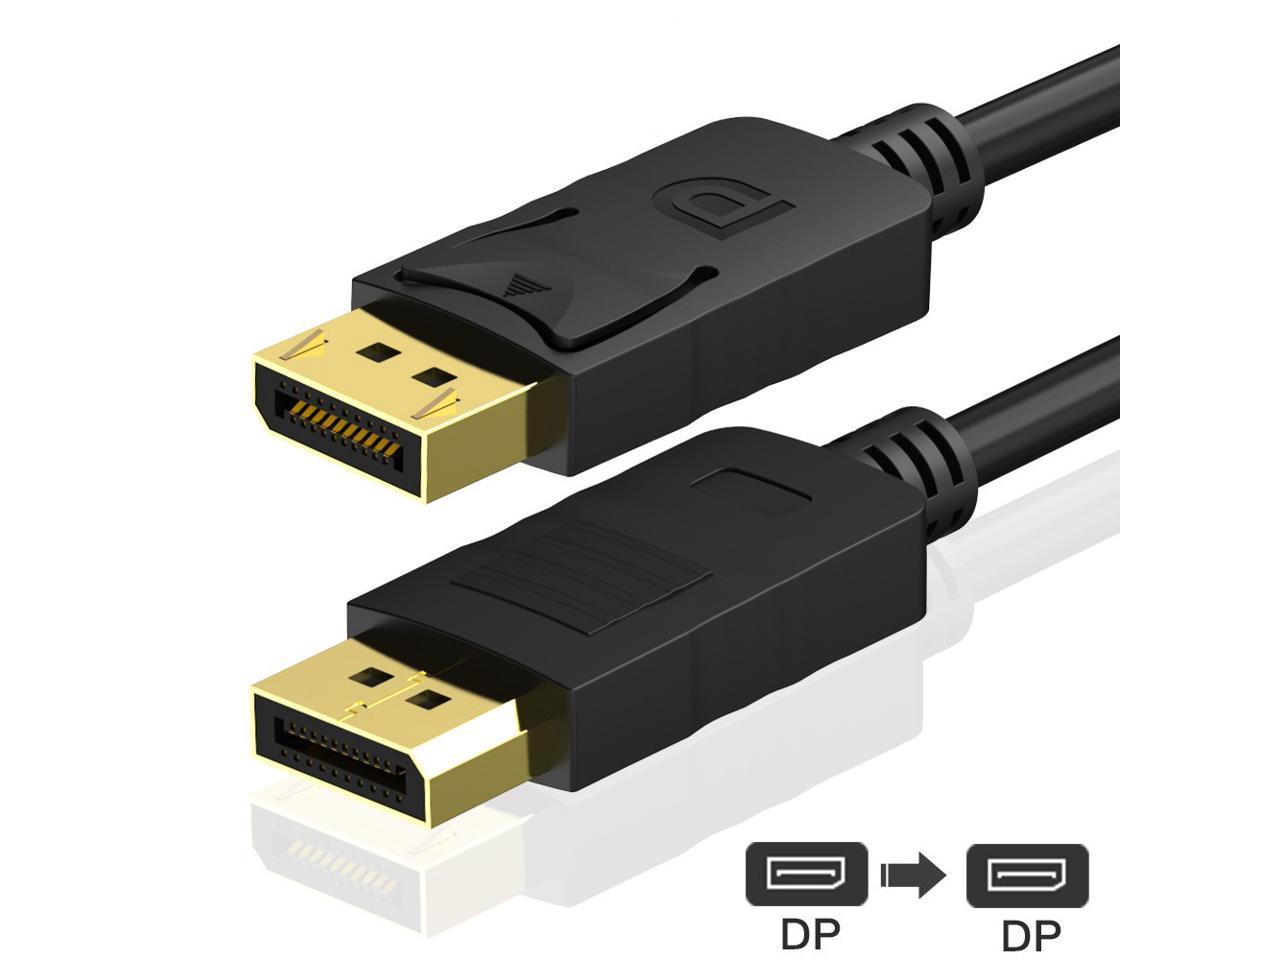 Displayport To Displayport Cable 6 Feet Gold Plated Display Port Cable 4k 60hz 1440p 144hz Dp Cable Compatible With Computer Desktop Laptop Pc Monitor Projector Black Newegg Com